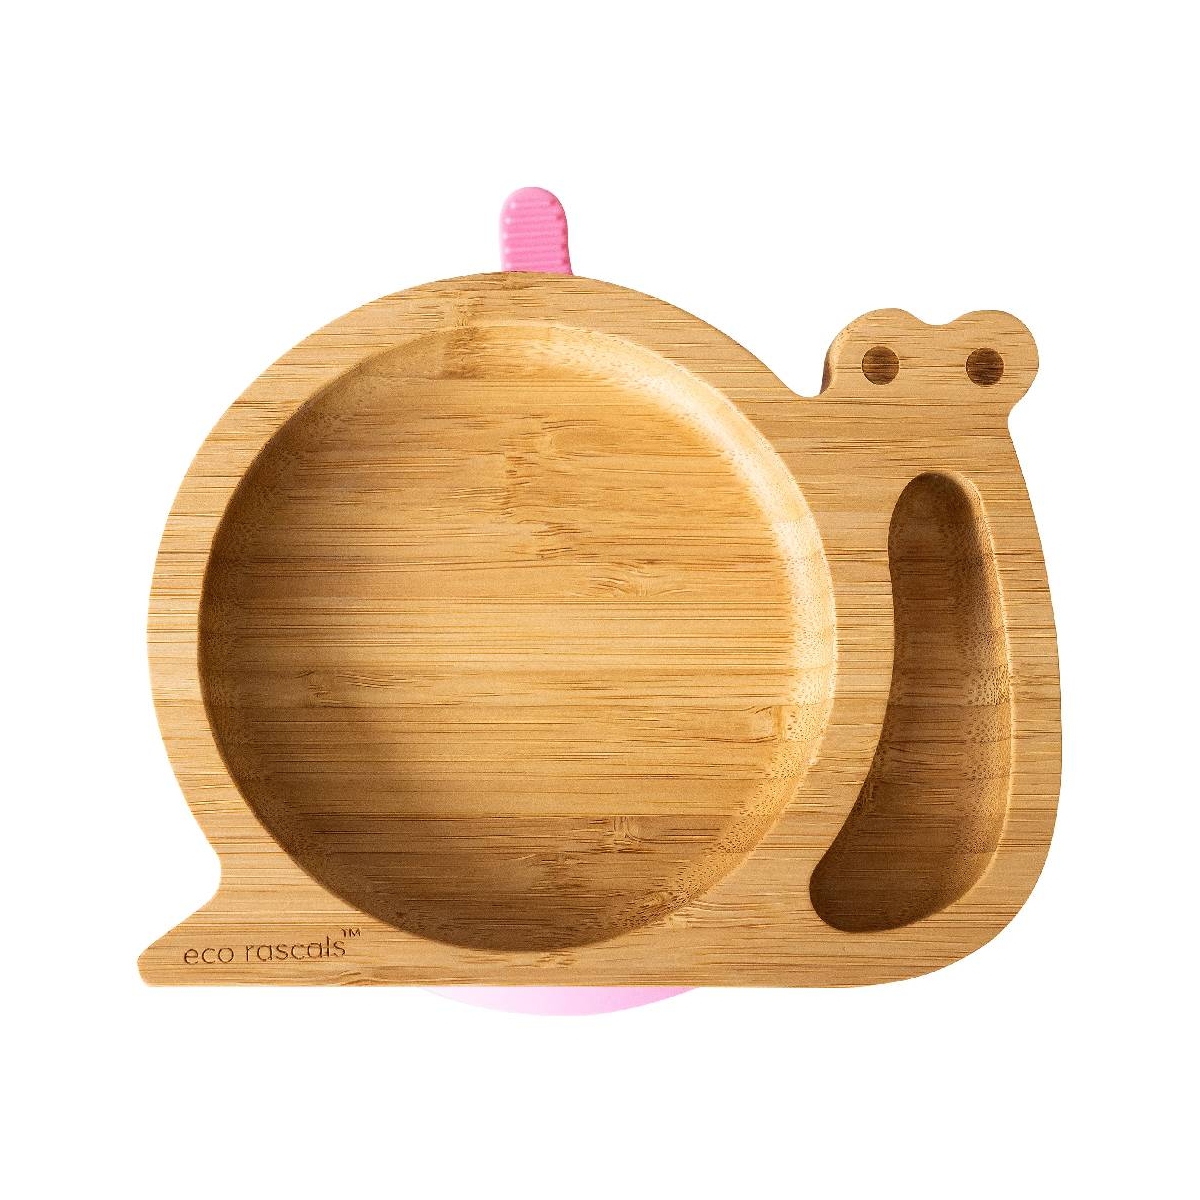 eco rascals Snail Shaped Bamboo Plate